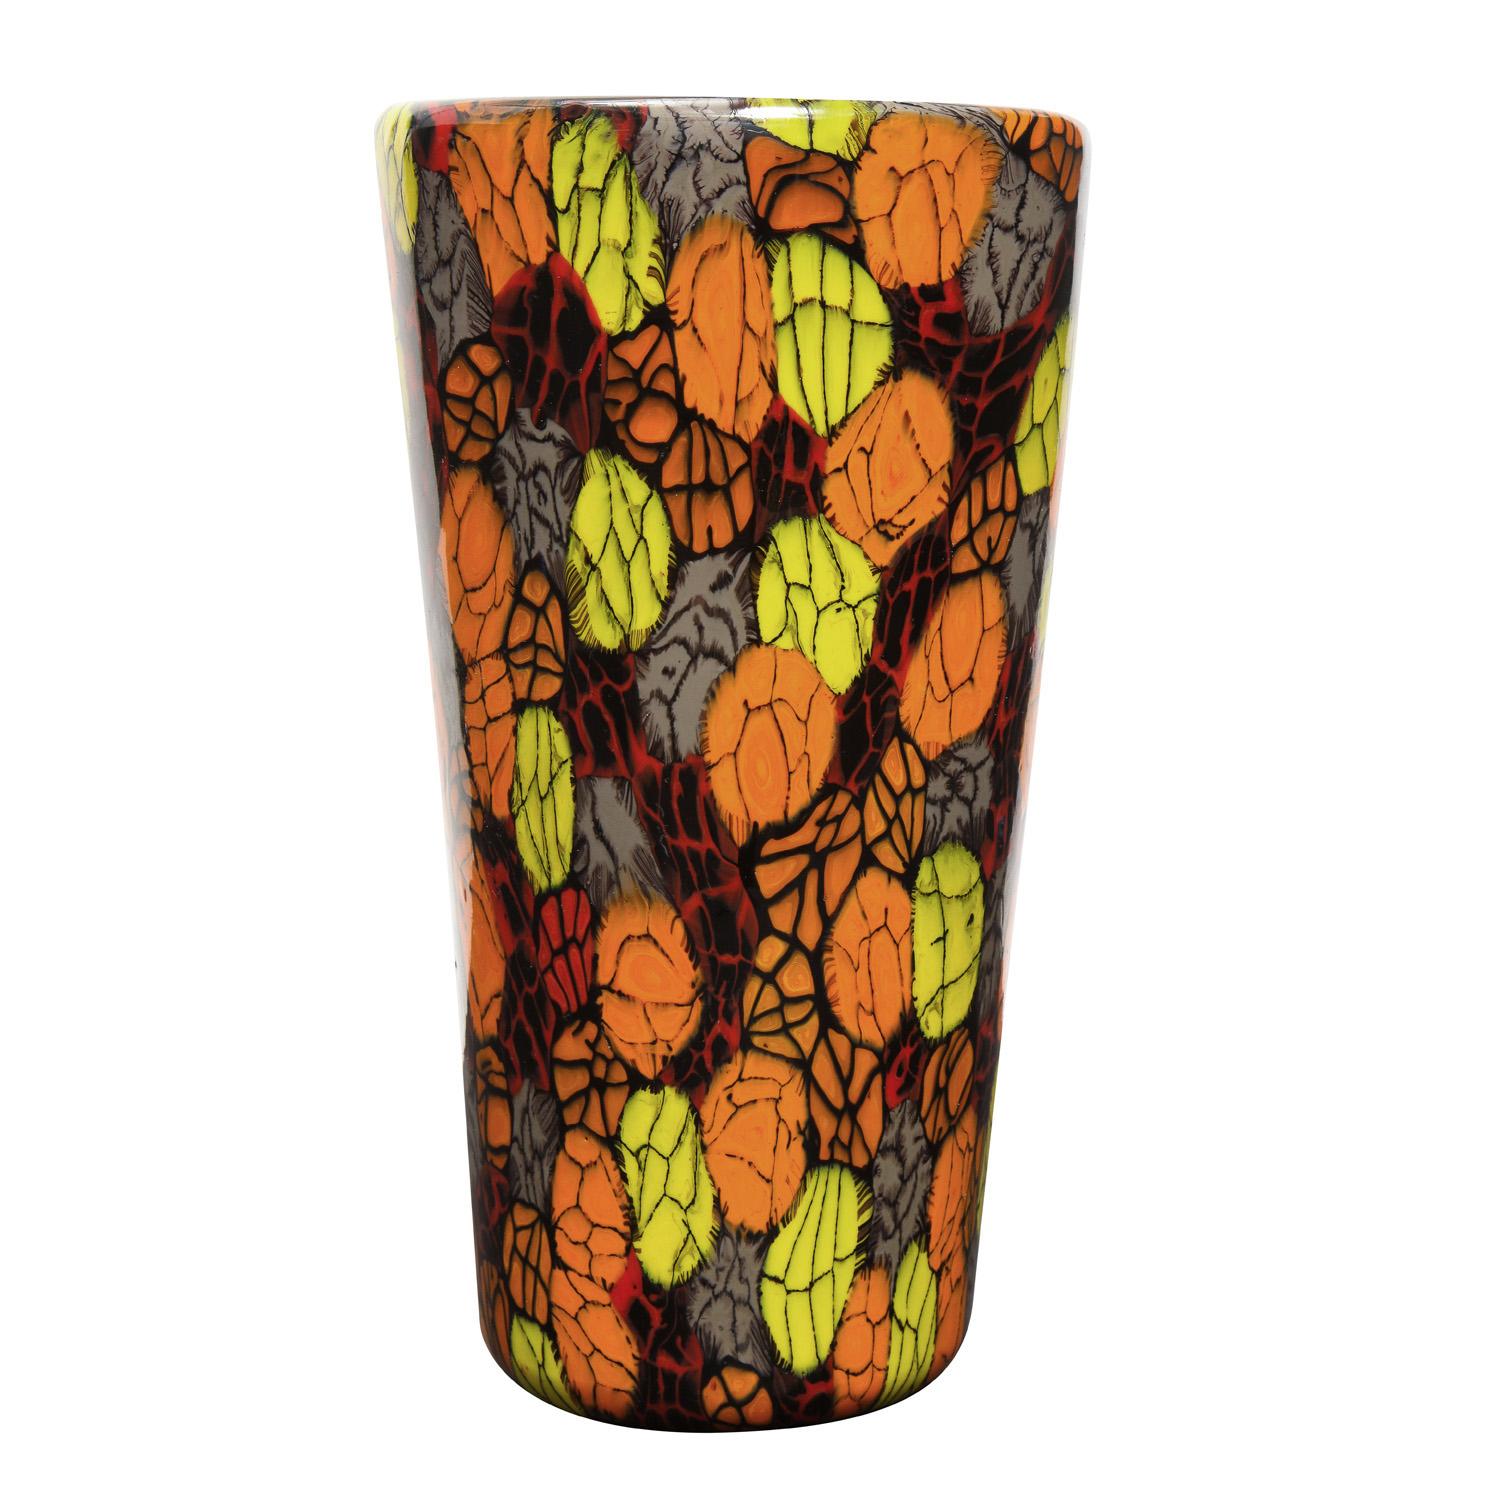 Hand-blown glass vase with unique red, orange, yellow and taupe murrine by Vittorio Ferro, Murano Italy, ca 1994. Vittorio Ferro, born in 1932, was a first rate glass master who spent many years working at Fratelli Toso in the 1950’s and 60’s,